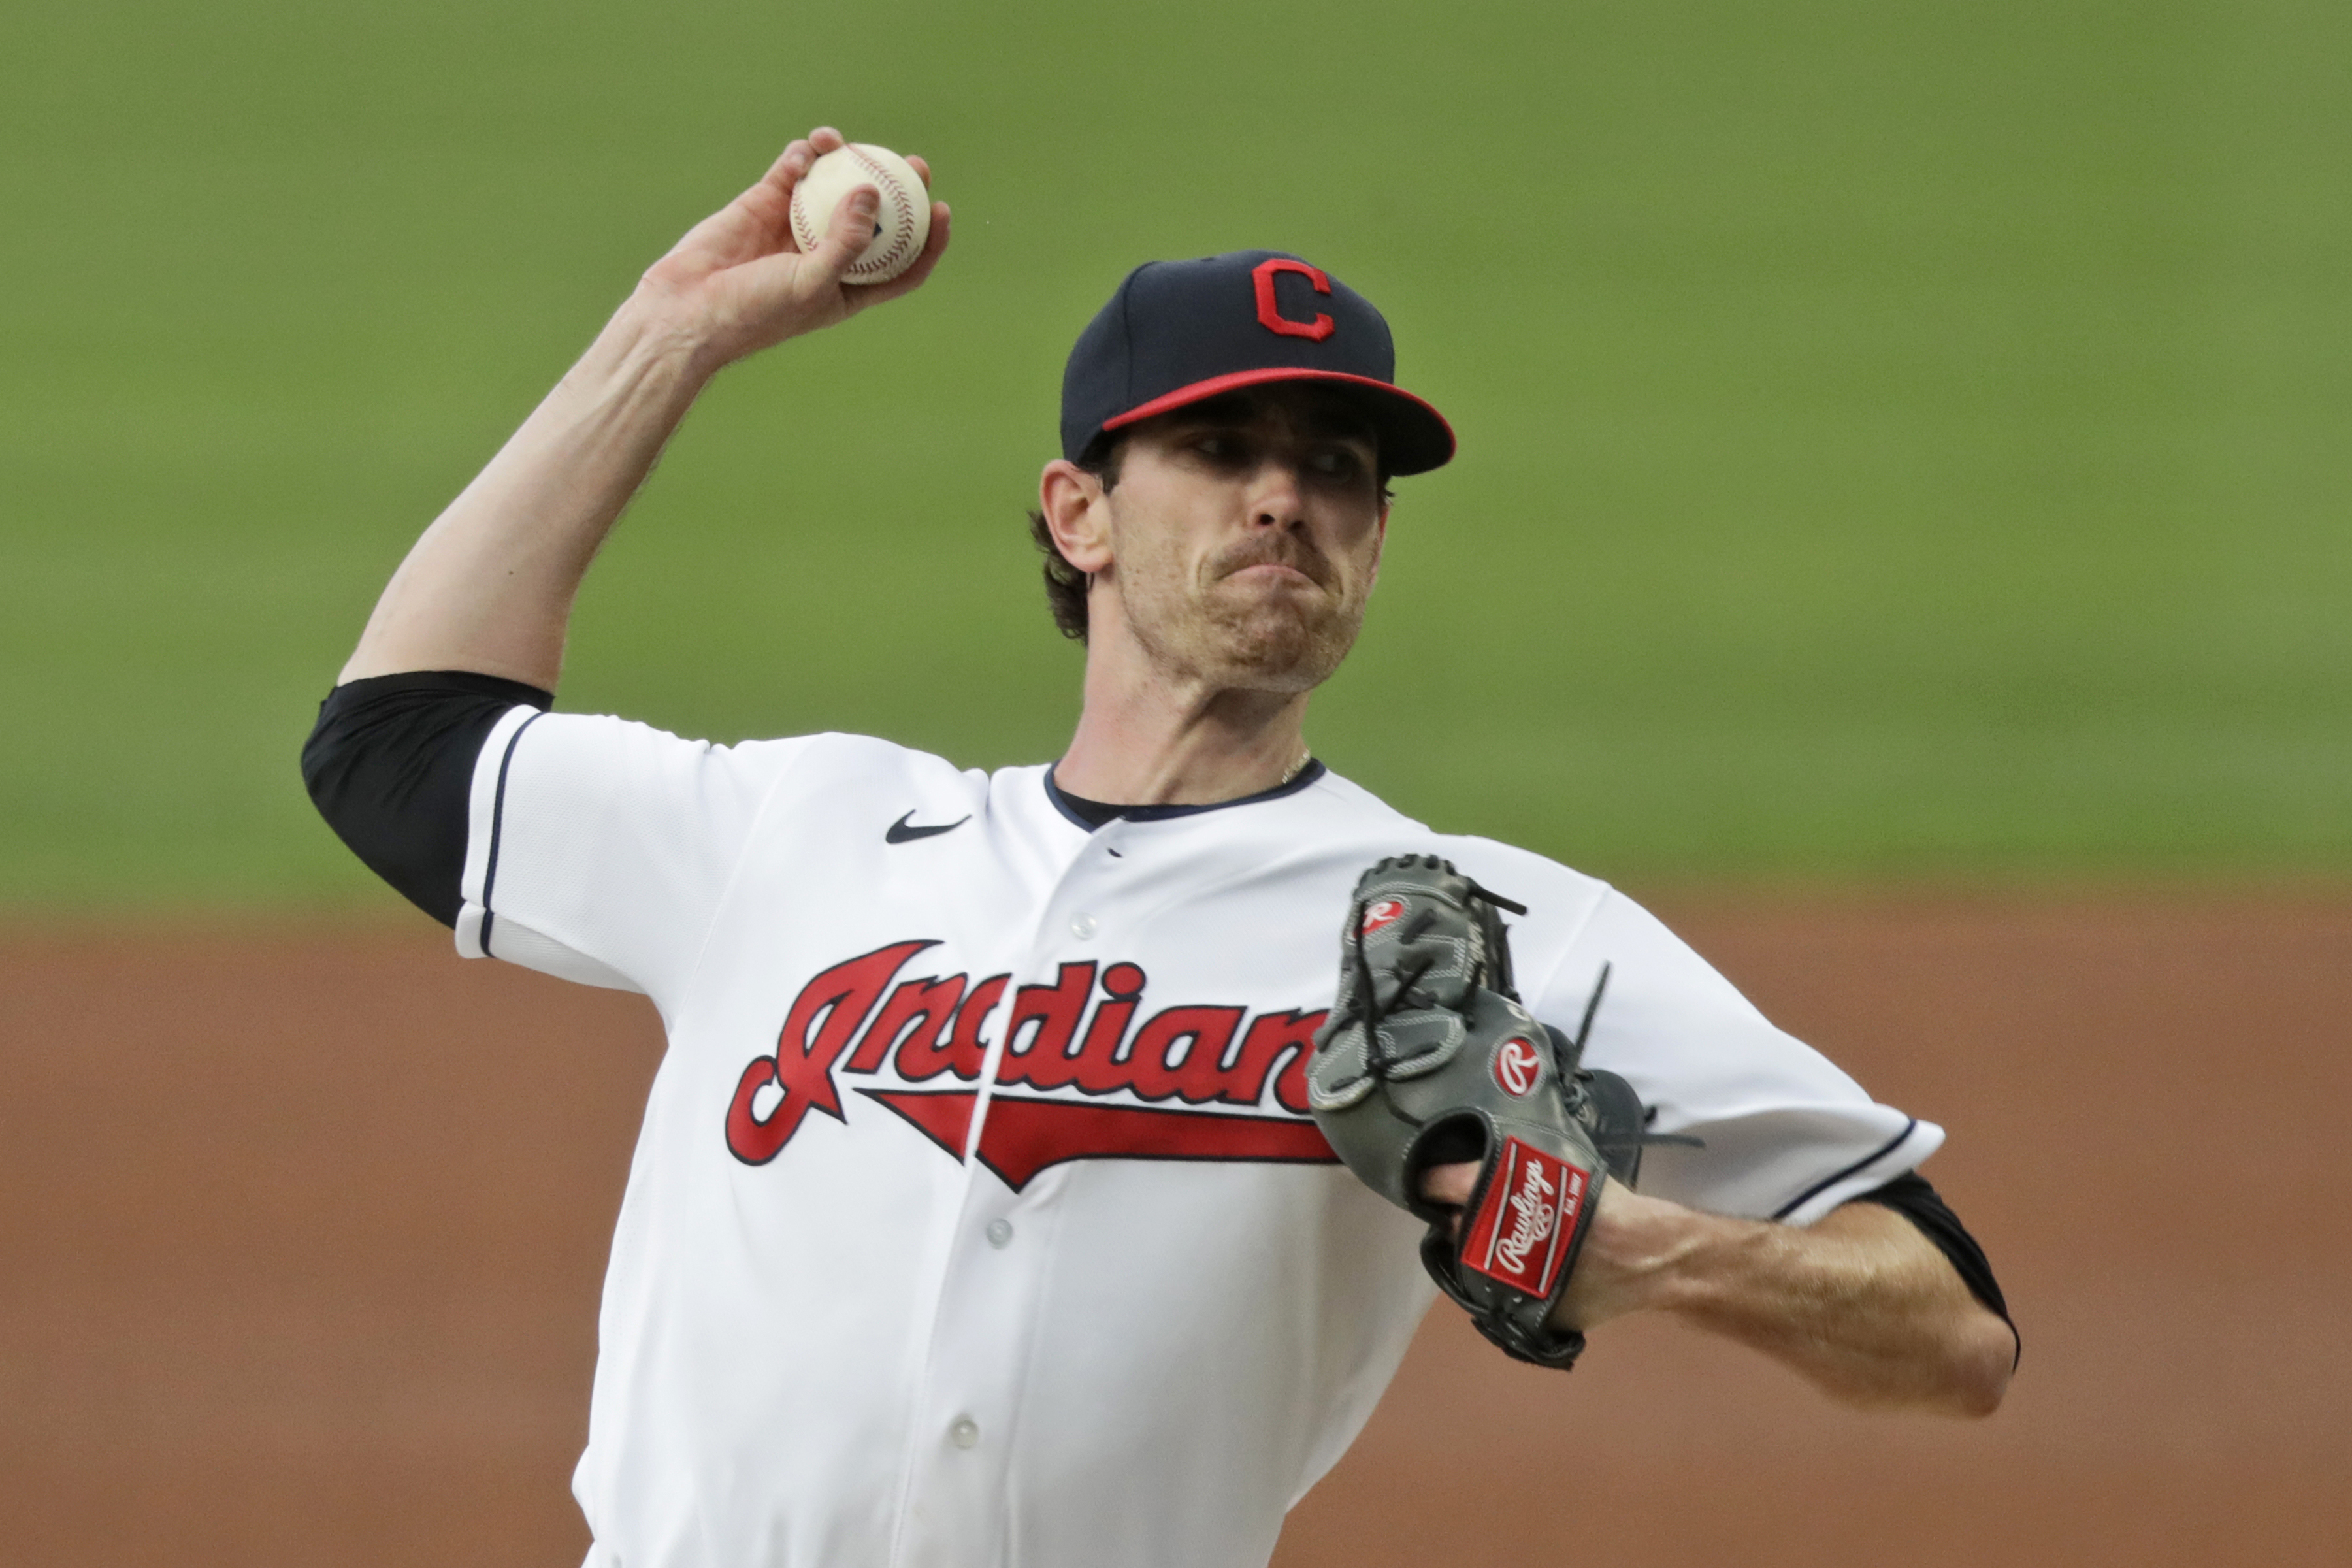 Rays vs. Indians, game 2: Alex Cobb is better than Trevor Bauer